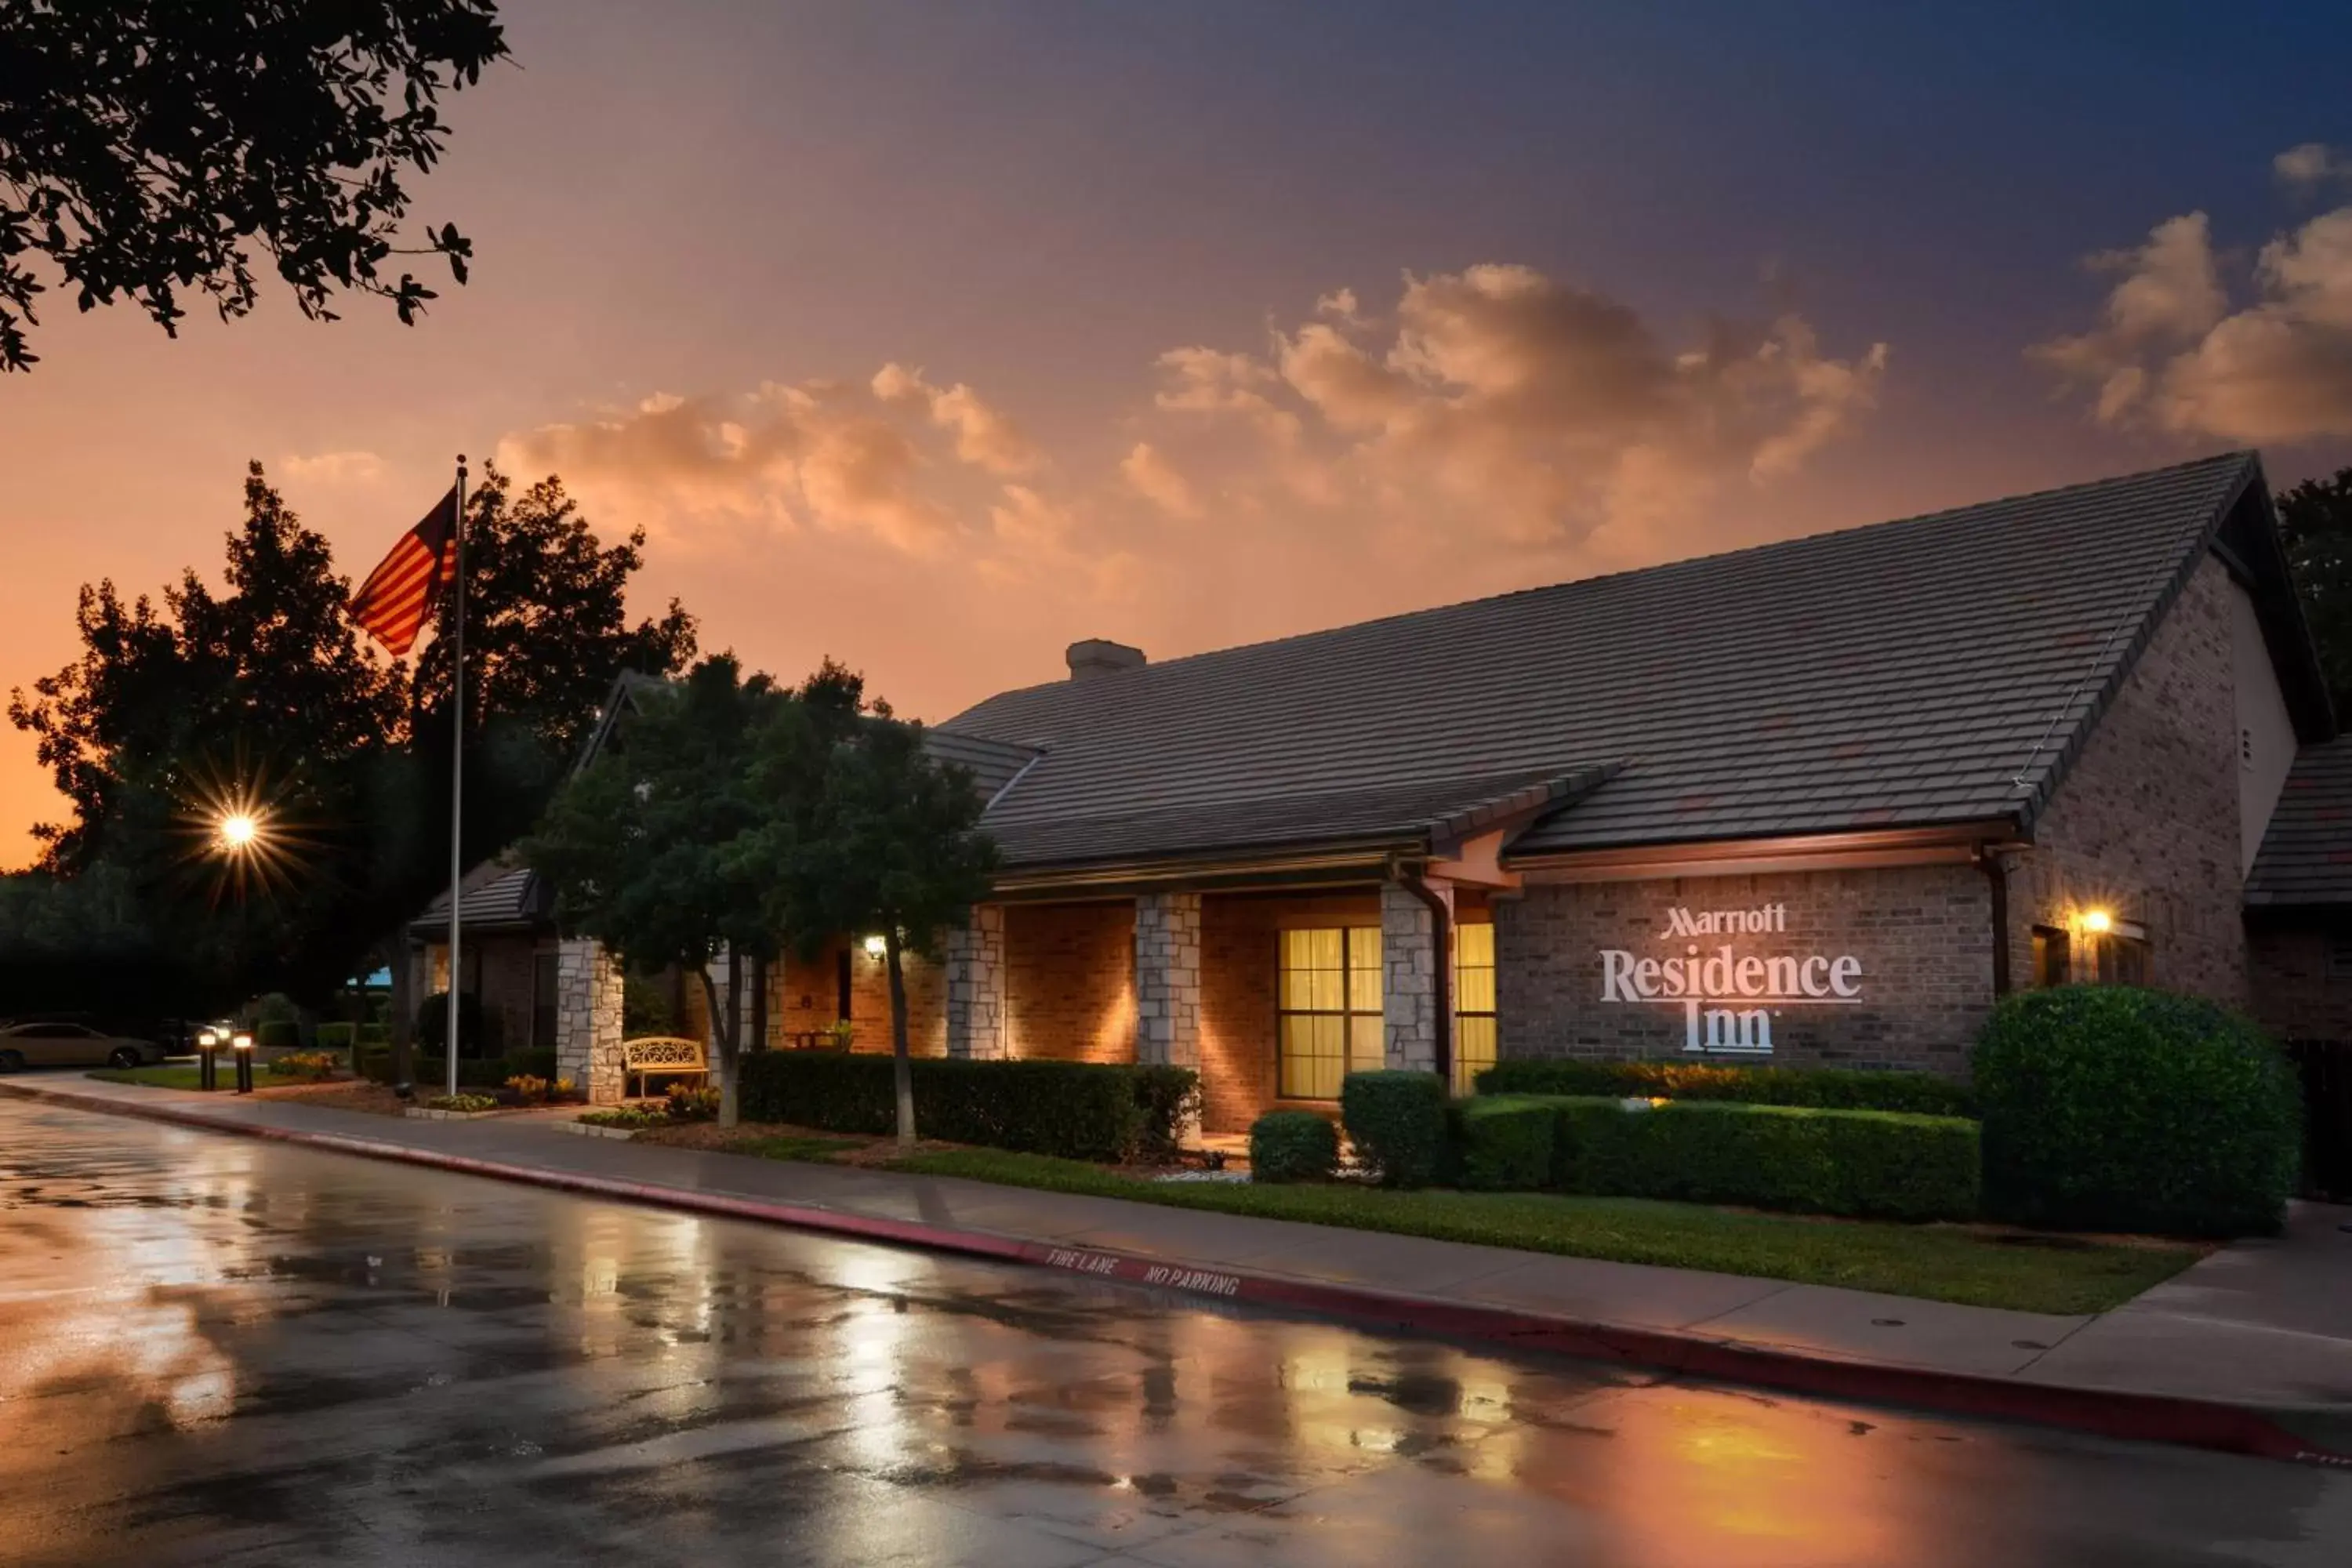 Property Building in Residence Inn by Marriott Dallas Plano/Legacy